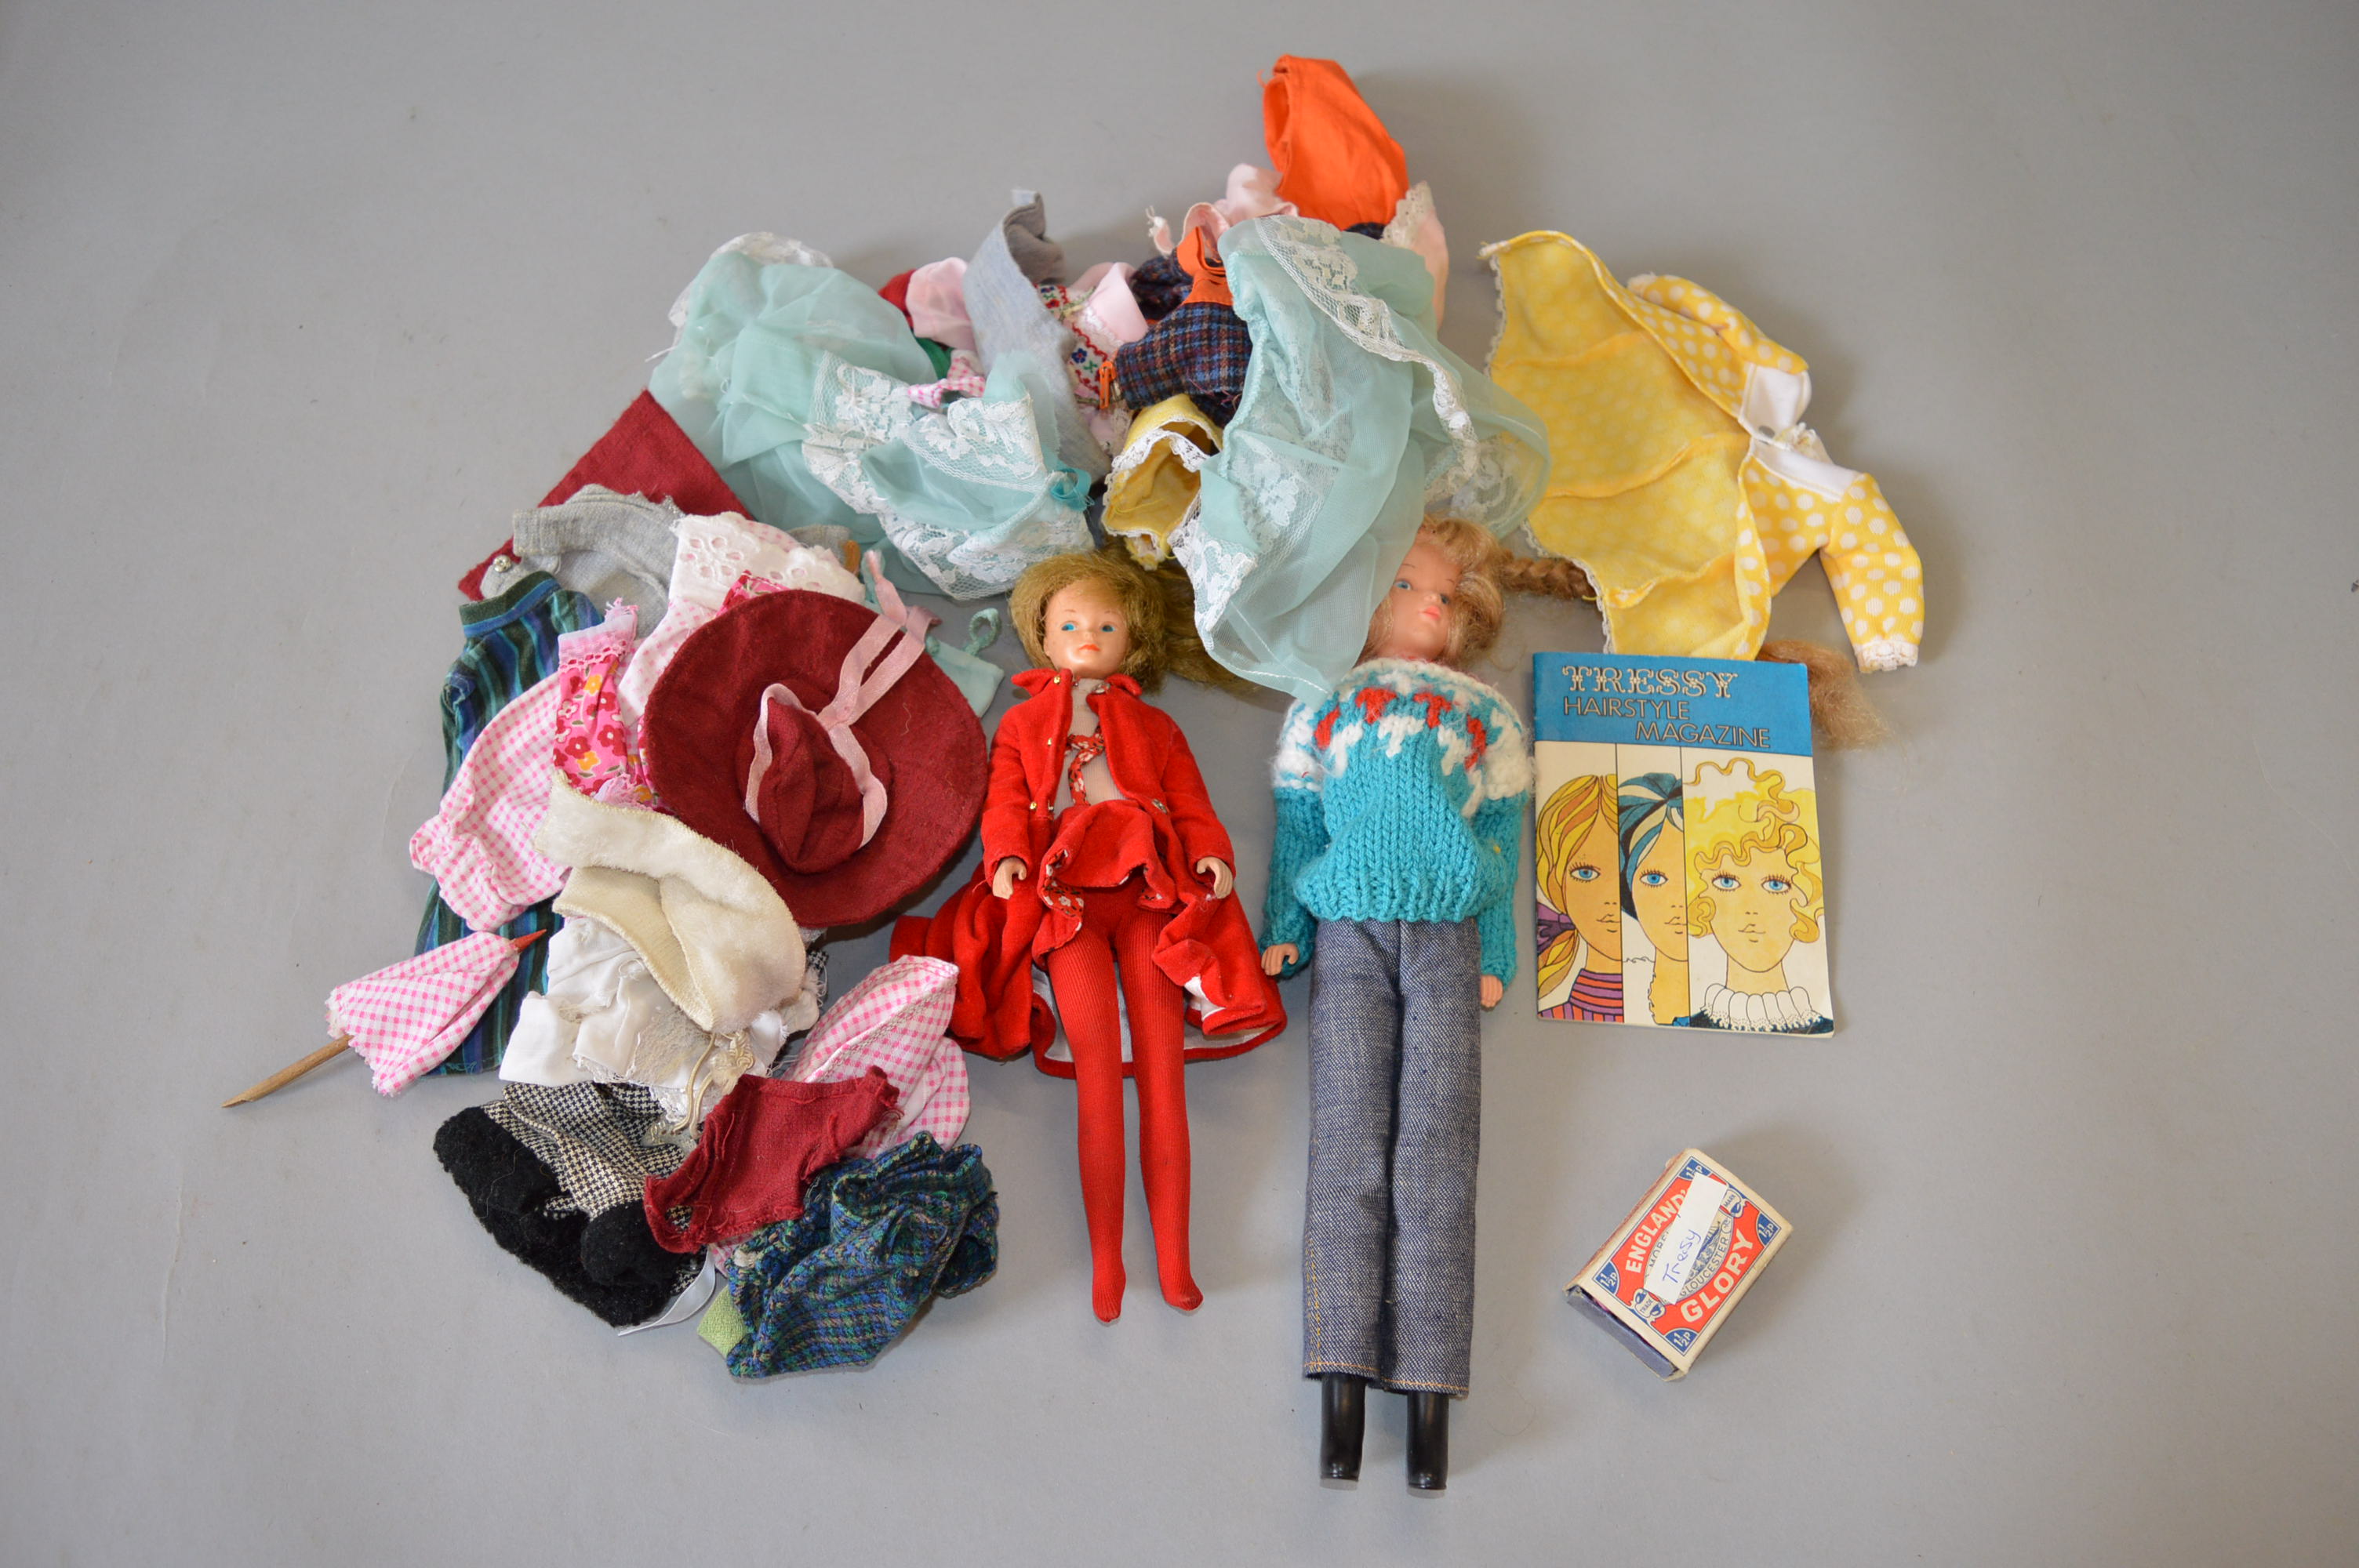 An unboxed Palitoy 'Tressy' doll together with another unboxed doll and a quantity of clothing and